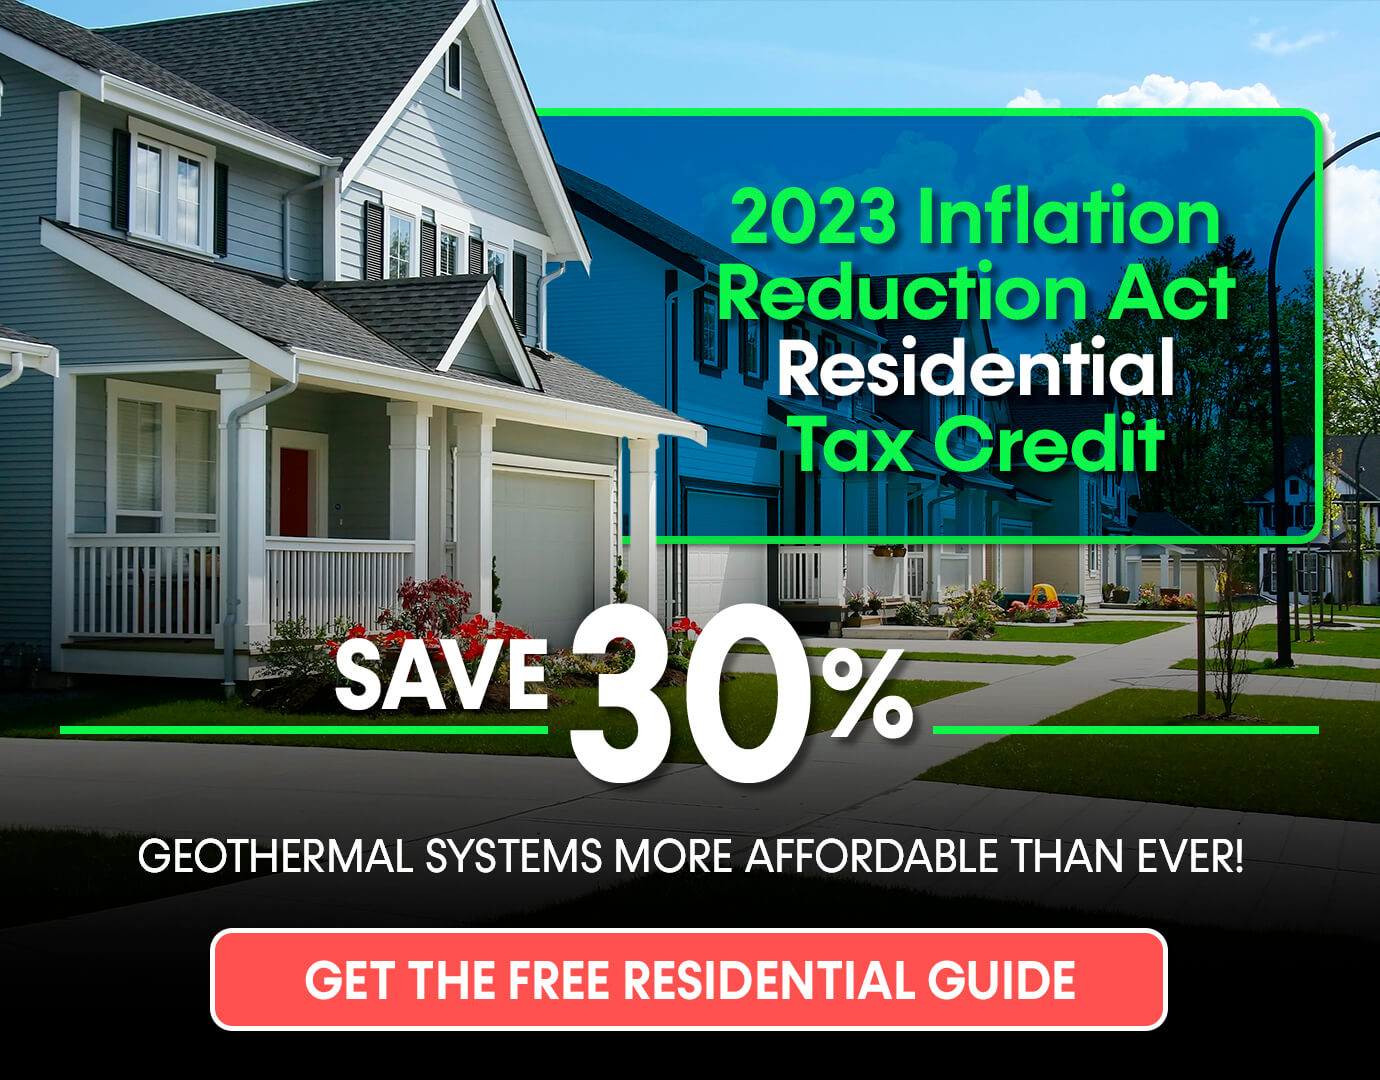 2023 Inflation Reduction Act (IRA) Residential Tax Credit